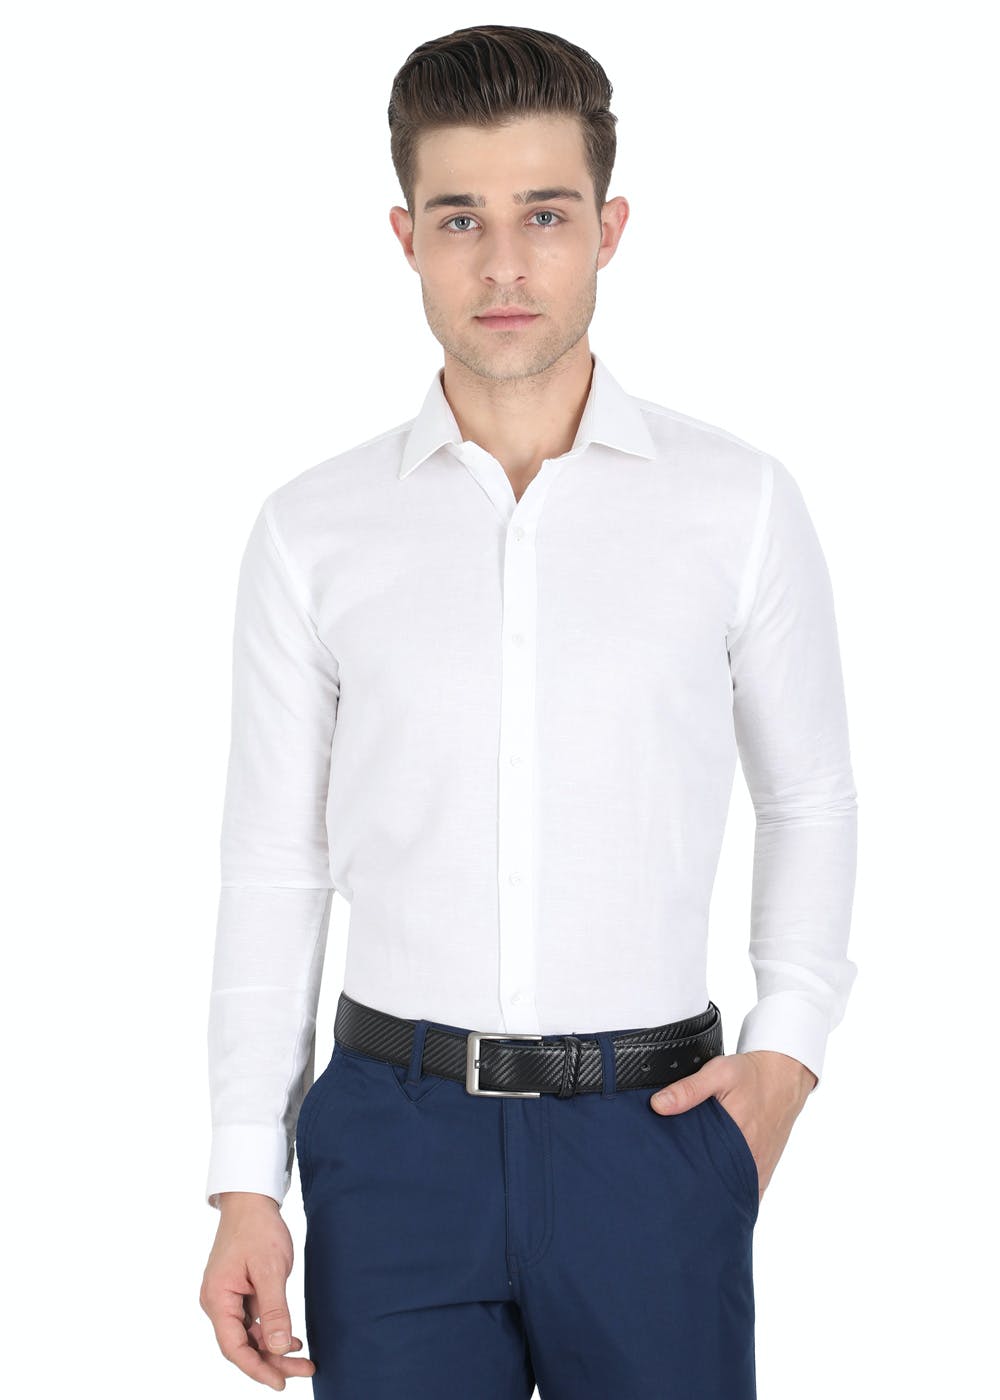 Get Basic Solid White Formal Full Sleeves Shirt at ₹ 999 | LBB Shop